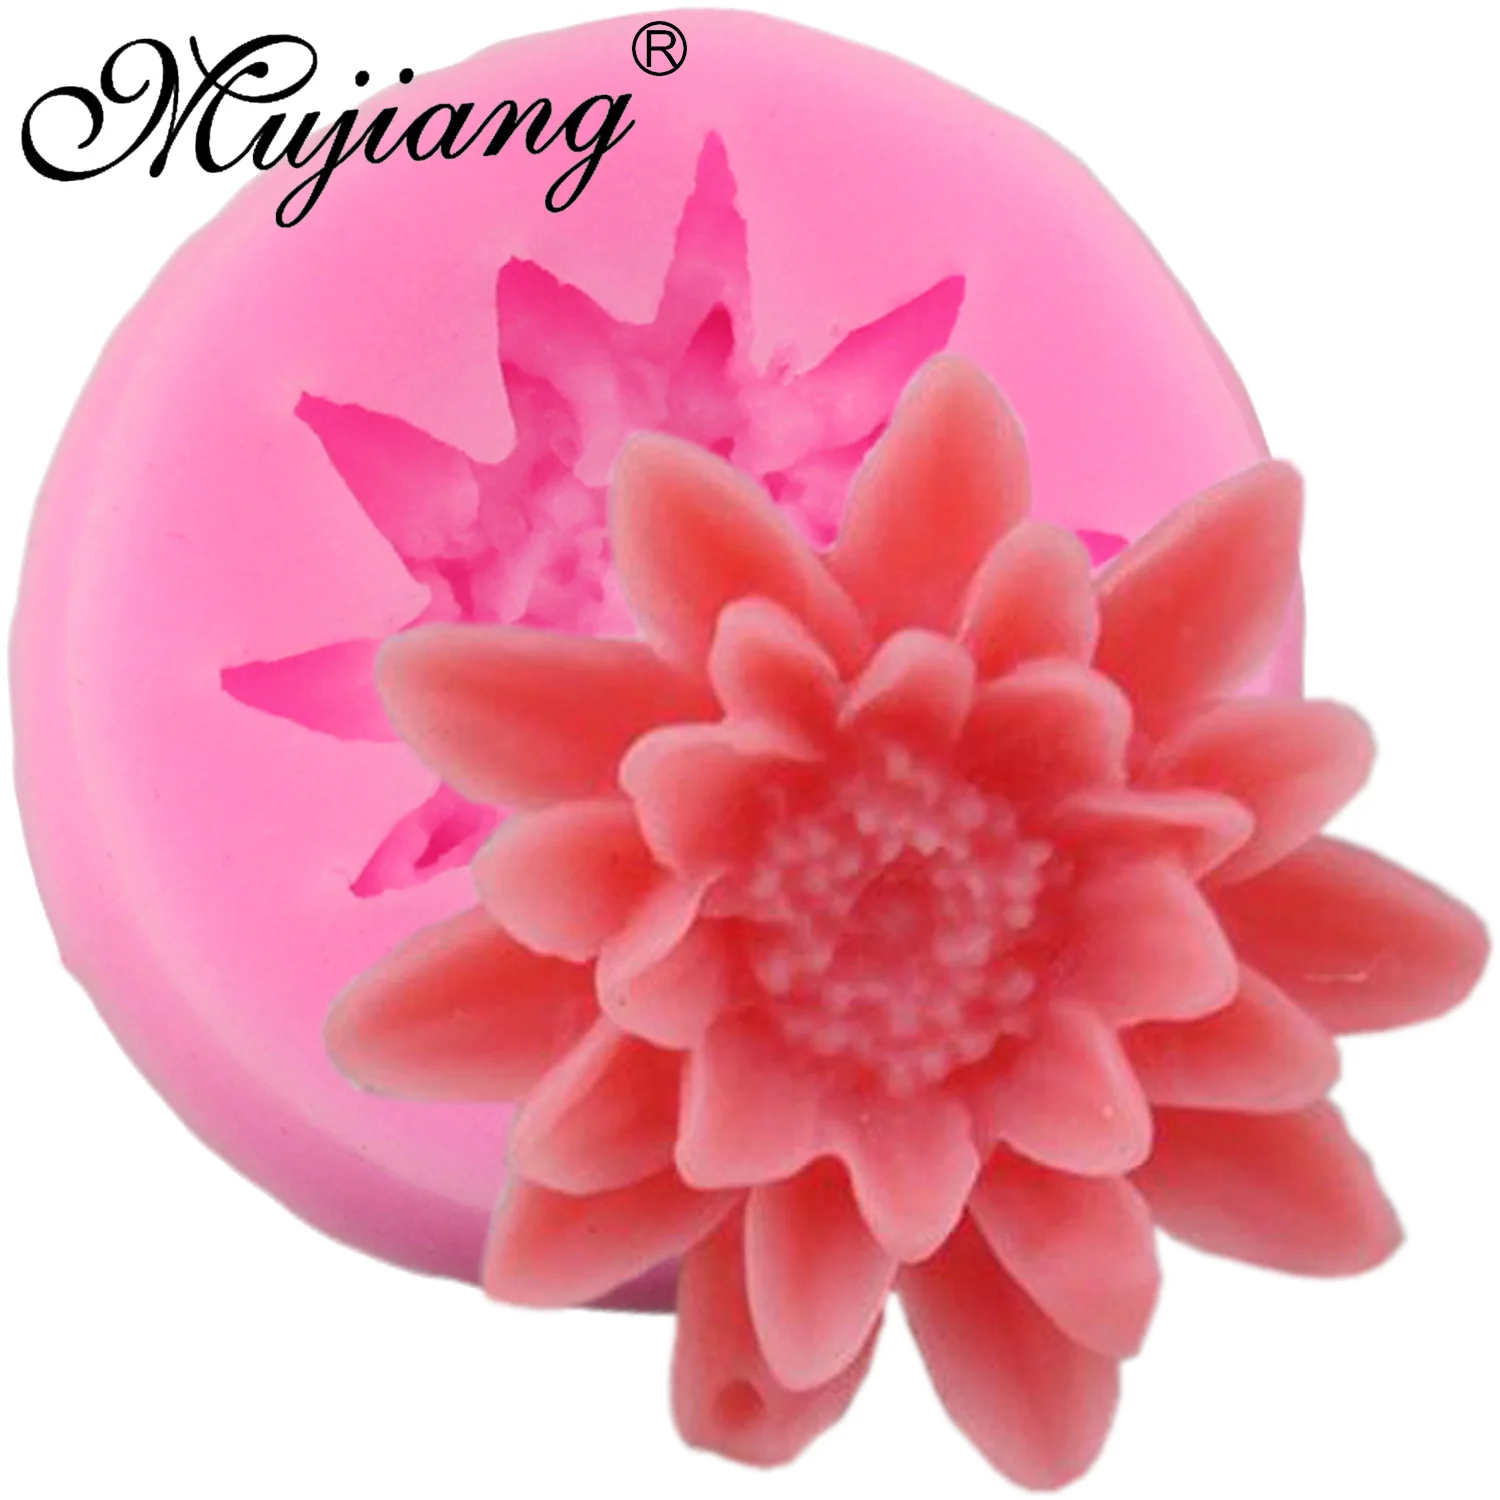 

Mujiang Daisy Silicone Fondant Mold Cake Decorating Tools Kitchen Baking Cupcake Jelly Chocolate Candy Gumpaste Fimo Clay Moulds